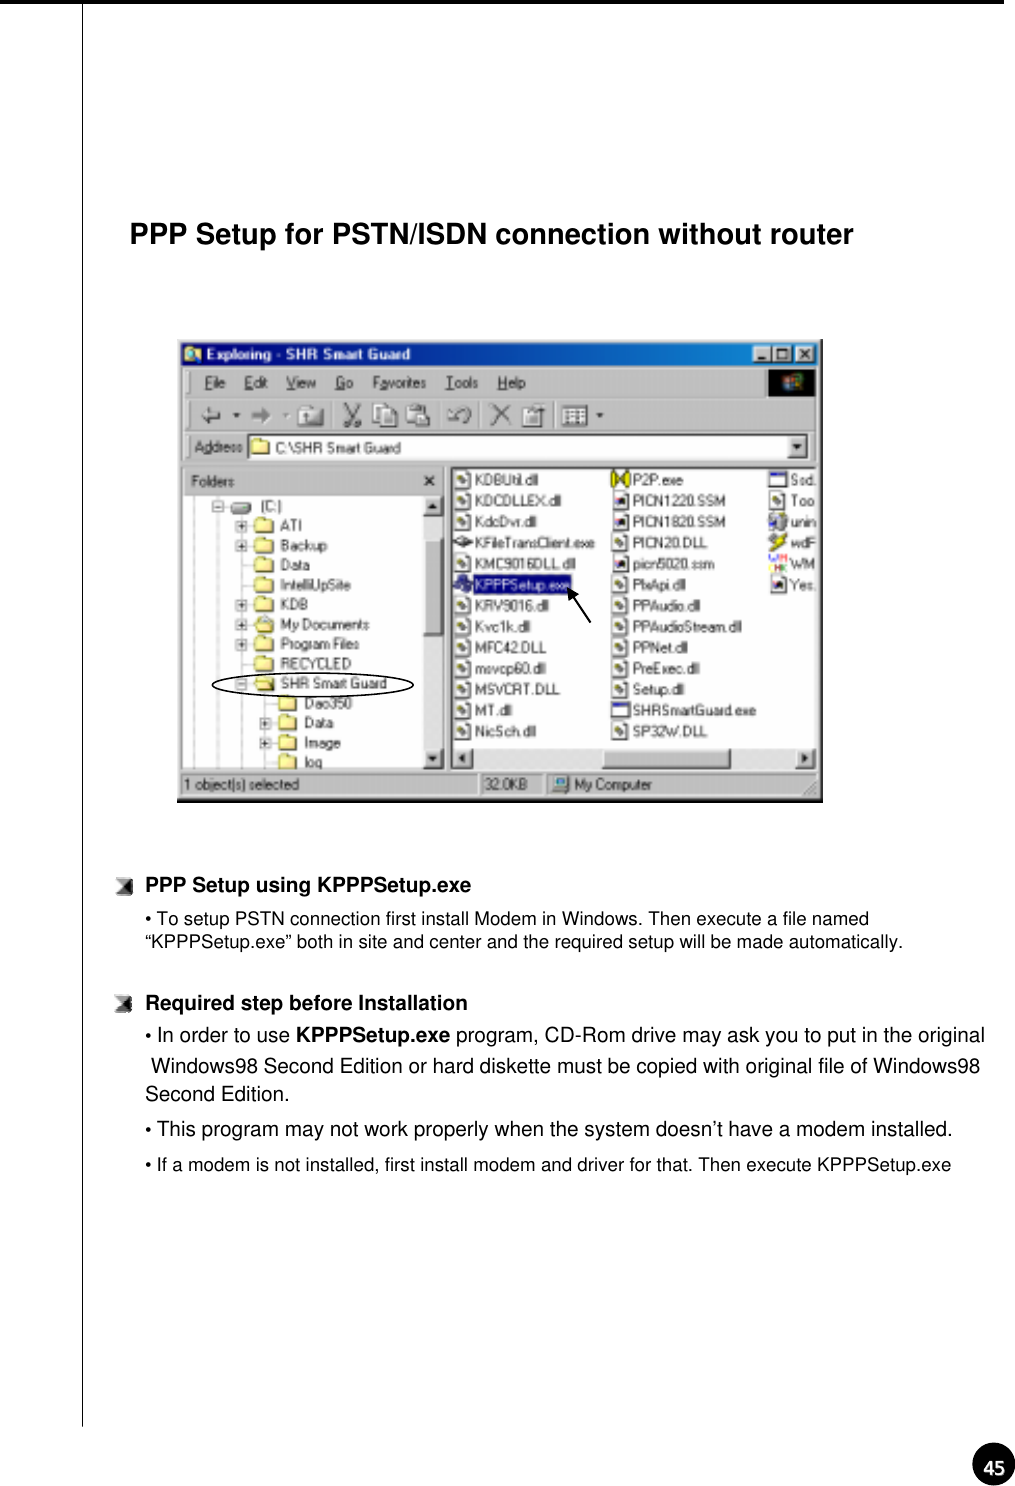 4545PPP Setup for PSTN/ISDN connection without routerPPP Setup using KPPPSetup.exe• To setup PSTN connection first install Modem in Windows. Then execute a file named “KPPPSetup.exe” both in site and center and the required setup will be made automatically.Required step before Installation•In order to use KPPPSetup.exe program, CD-Rom drive may ask you to put in the original Windows98 Second Edition or hard diskette must be copied with original file of Windows98 Second Edition.•This program may not work properly when the system doesn’t have a modem installed.• If a modem is not installed, first install modem and driver for that. Then execute KPPPSetup.exe